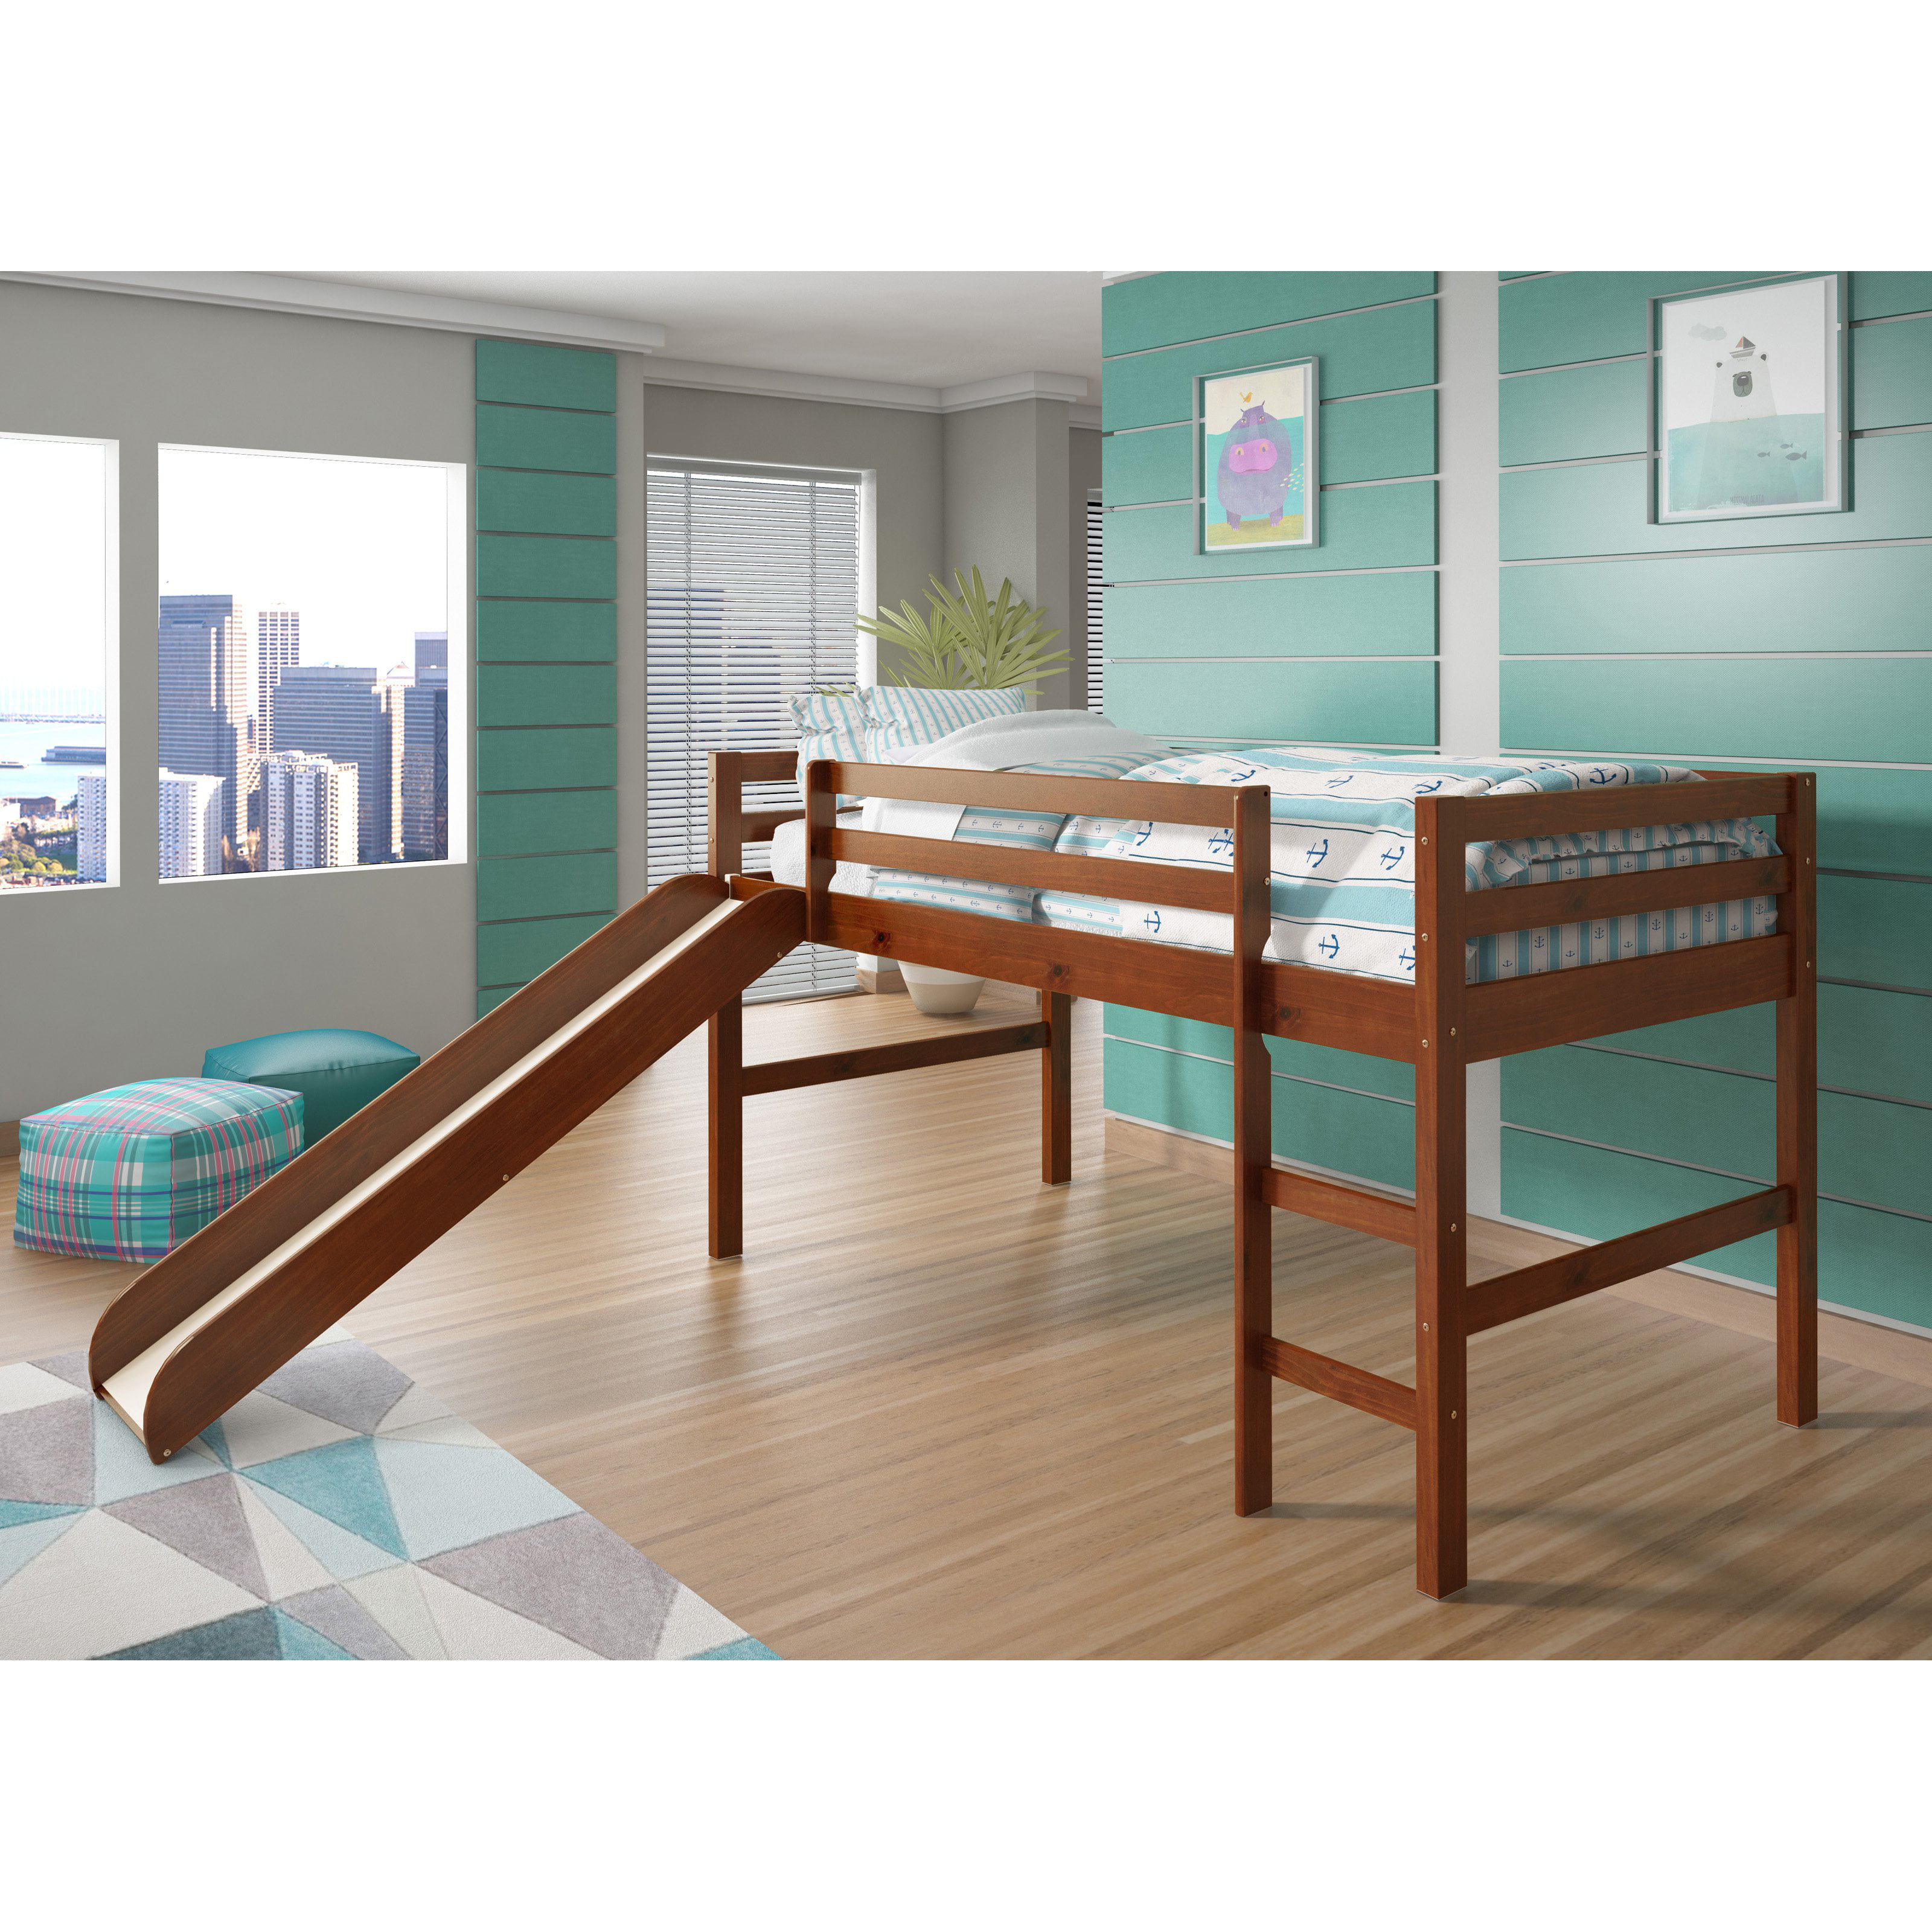 Donco Twin Low Loft Bed With Slide And, Zebra Bunk Bed